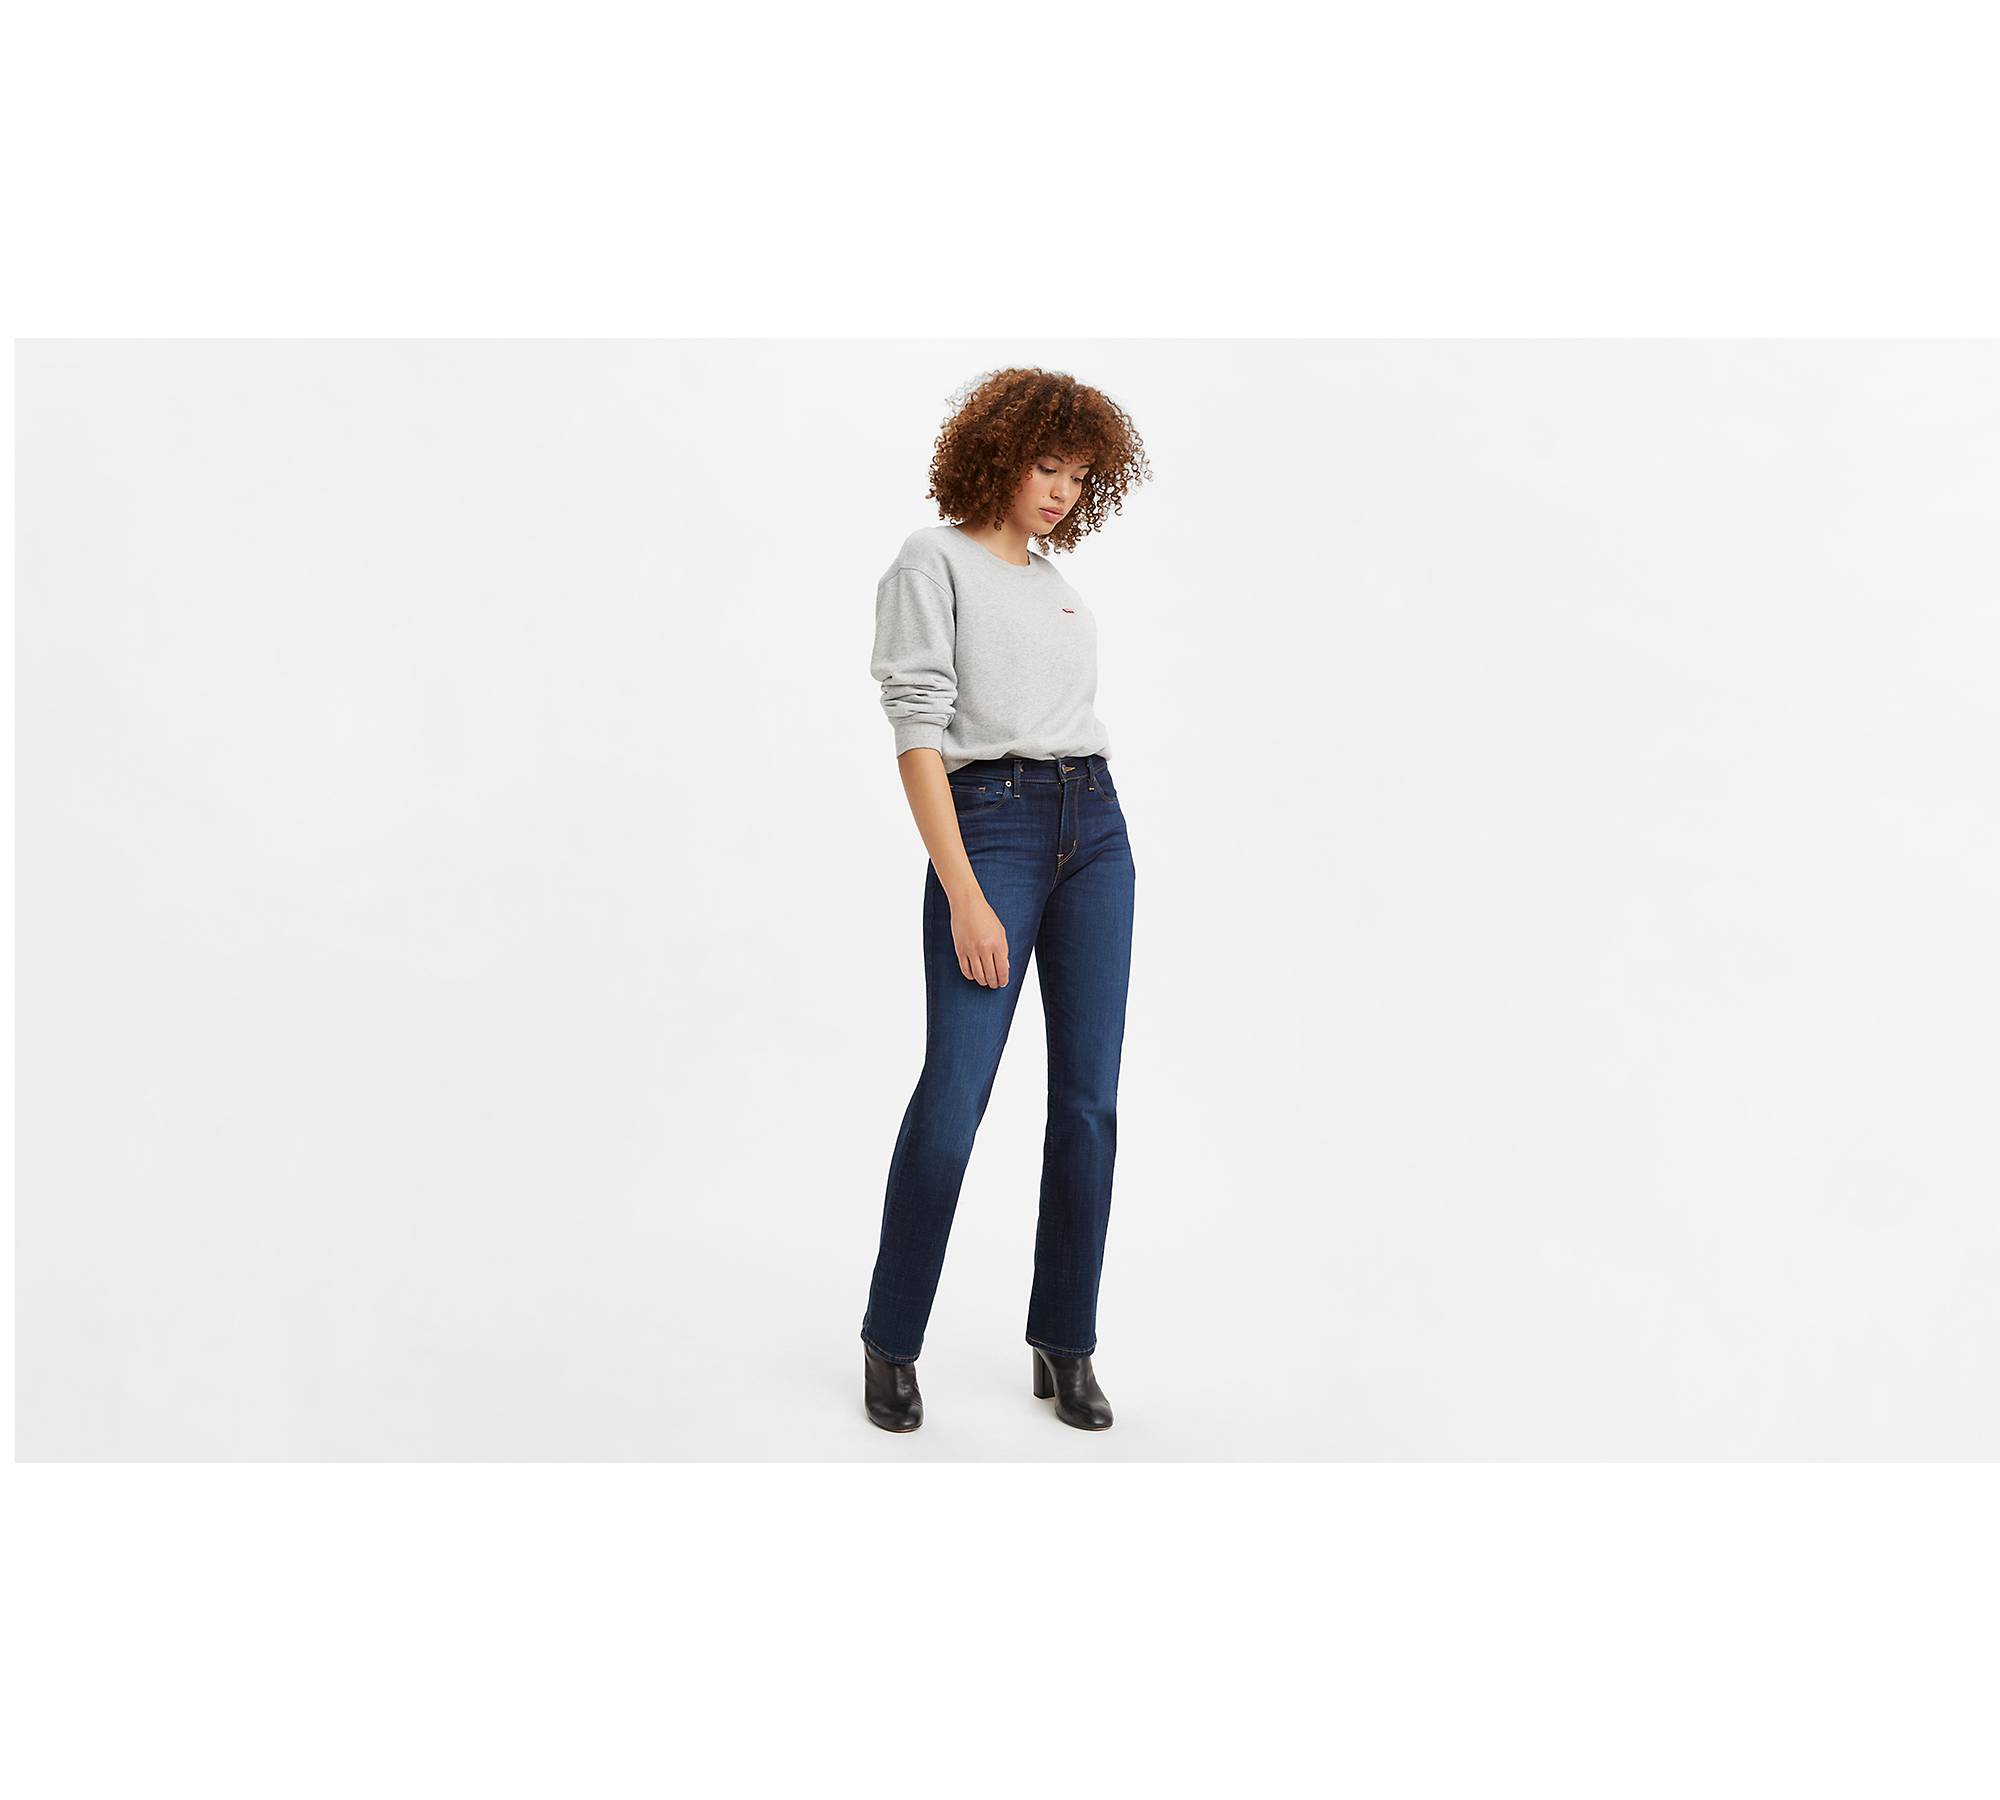 Signature by Levi Strauss & Co.® Women's Mid-Rise Bootcut Jeans